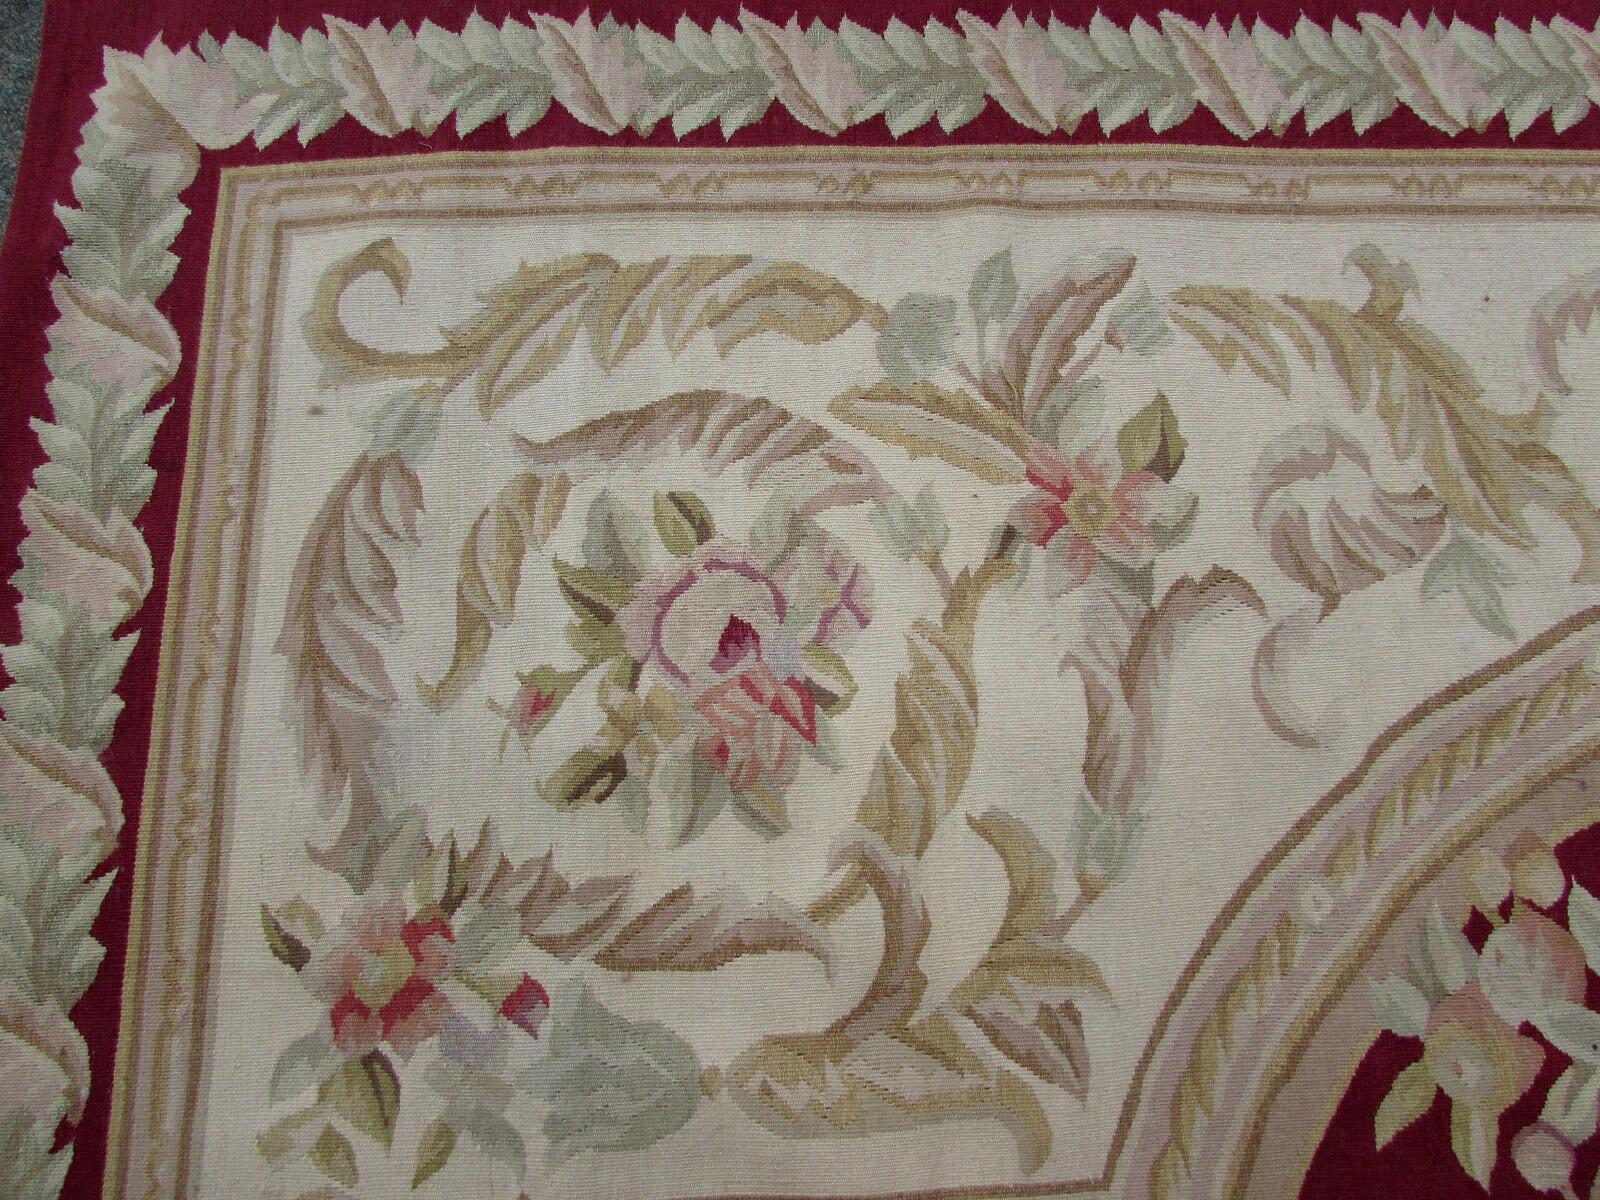 Handmade vintage French Aubusson rug in wool. This rug has been made in the end of 20th century, it is in original good condition.

-Condition: Original good,

-circa 1970s,

-Size: 8' x 10.5' (240cm x 312cm),

-Material: Wool,

-Country